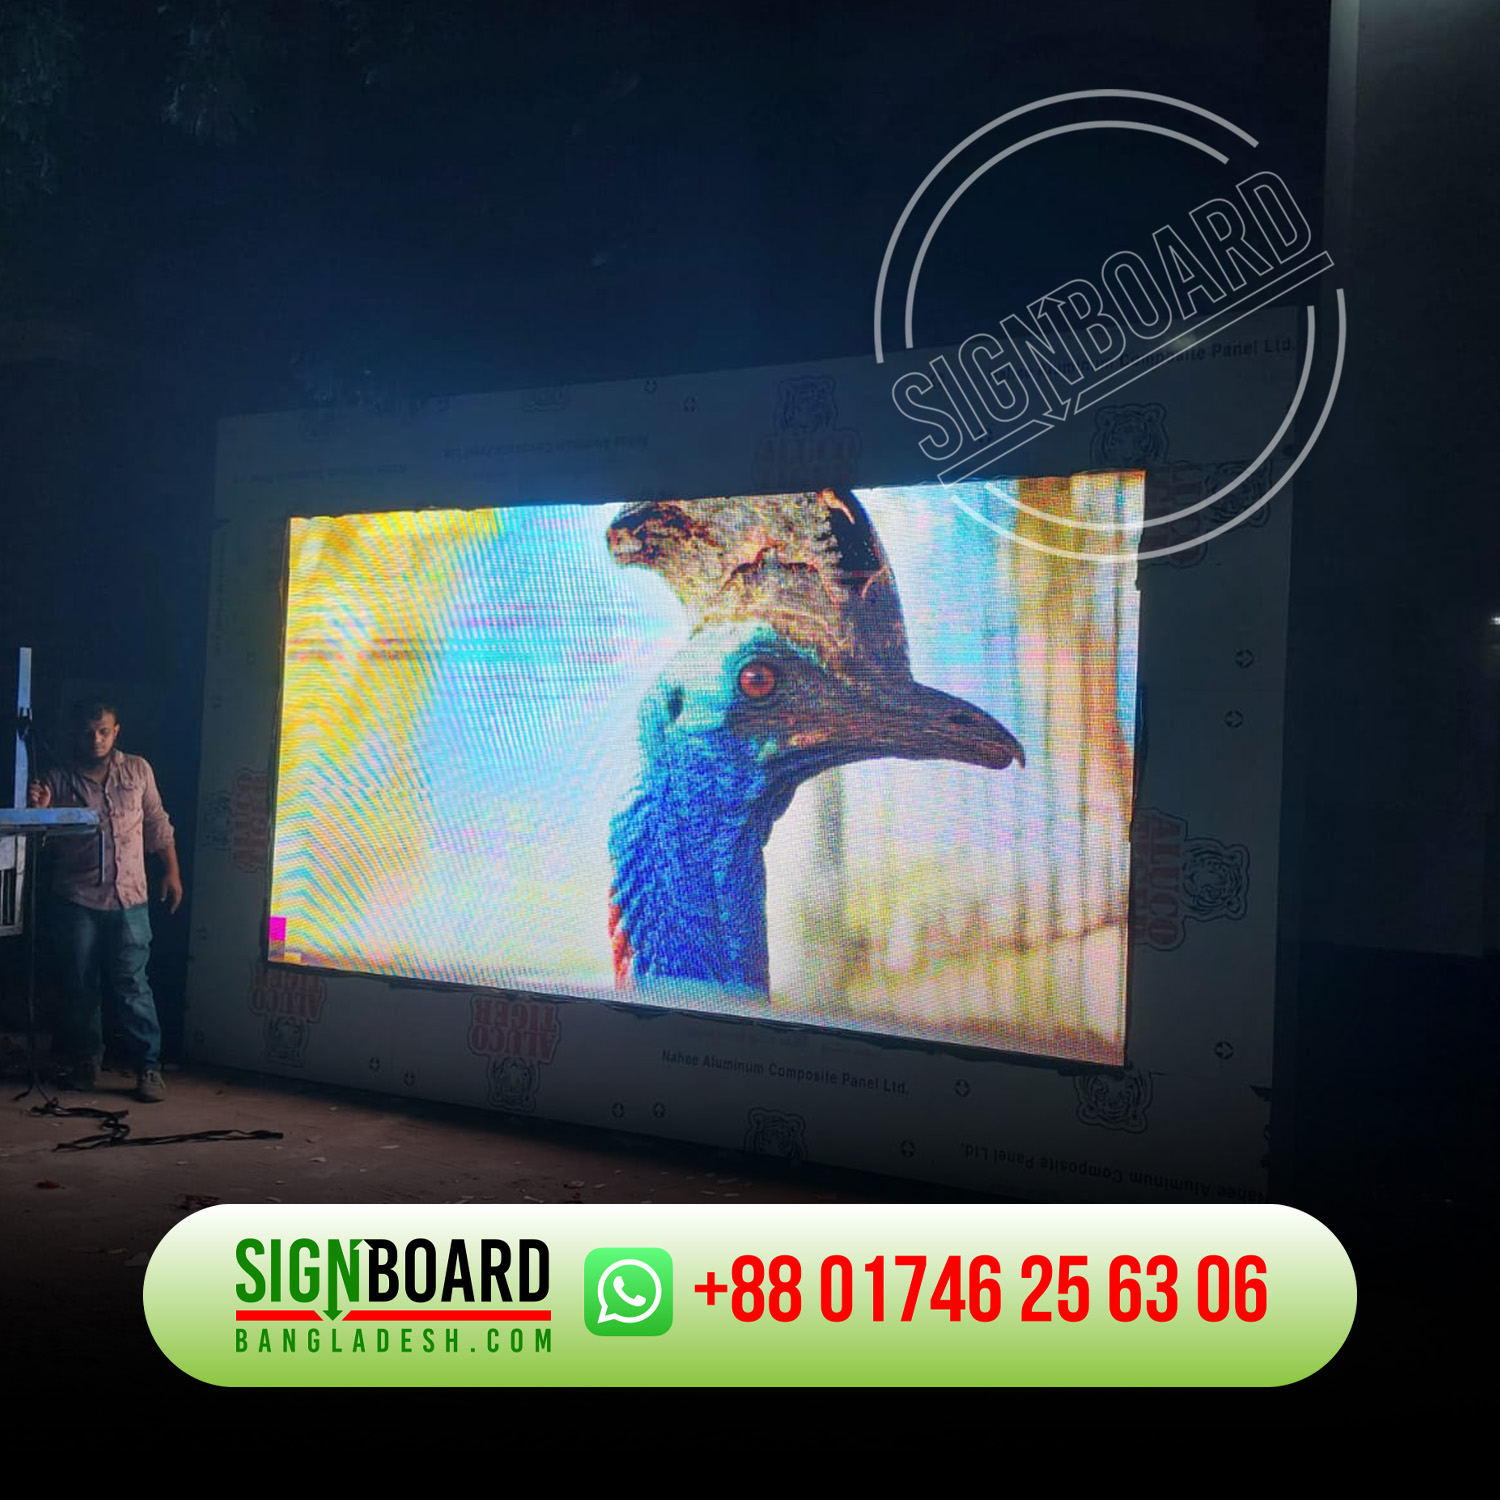 LED Moving Display p1 p2 p3 p4 p p5, p6, p7 p8 p9 p10. Outdoor p6, p8 Digital LED Advertising display module BD. Buy Waterproof And High-Quality p7.62 indoor led display screen. P10 P8 P6 P5 P4 P3 P2 Outdoor LED Video Display. We Provide Led Sign, Name plate, Neon sign, Shop Sign BD. LED Display Board Sale In Dhaka Bangladesh. LED SCROLLING BOARD by ECHO AD, Made in Bangladesh. P10 Red Color Outdoor LED Moving Display. LED Sign Board Price in Bangladesh, Outdoor led display screen price in Bangladesh. Digital Led Outdoor & Indoor Electronic Billboard Signage. Scrolling Billboard. Scrolling billboards and posters manufacturer. LED scrolling billboard module P10 Outdoor Waterproof.